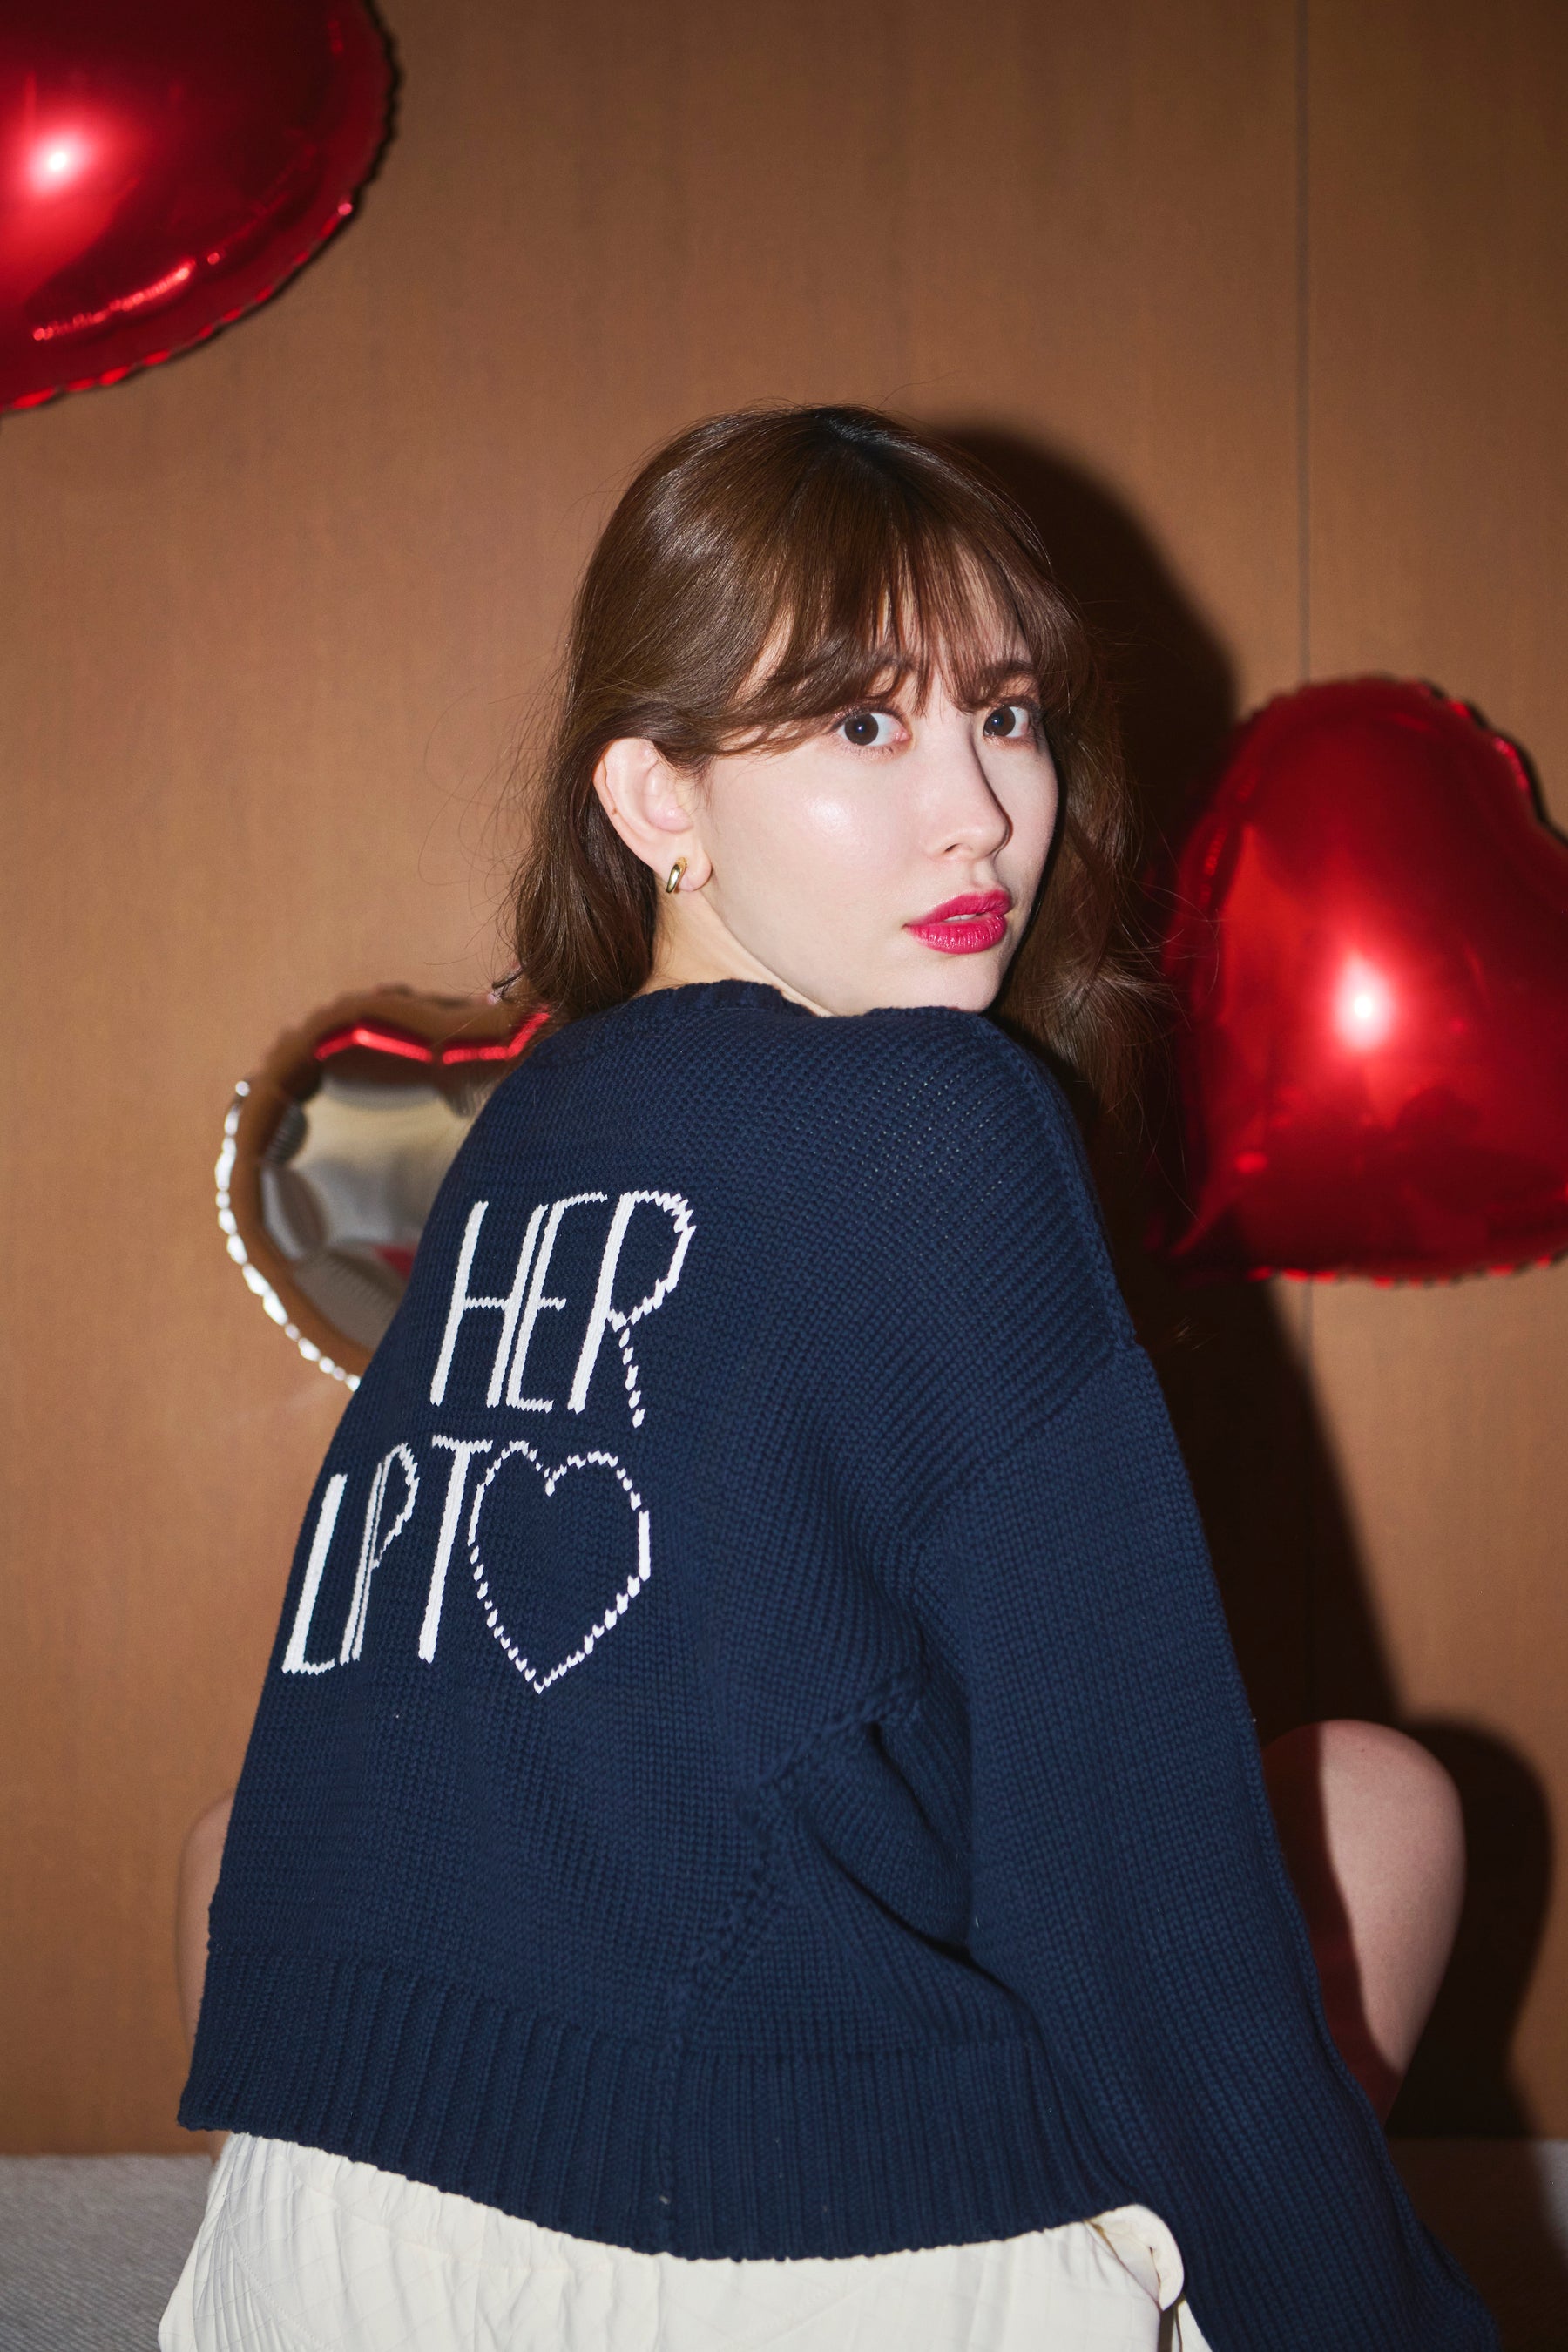 Share The Love Knit Top herliptoステッカーなし